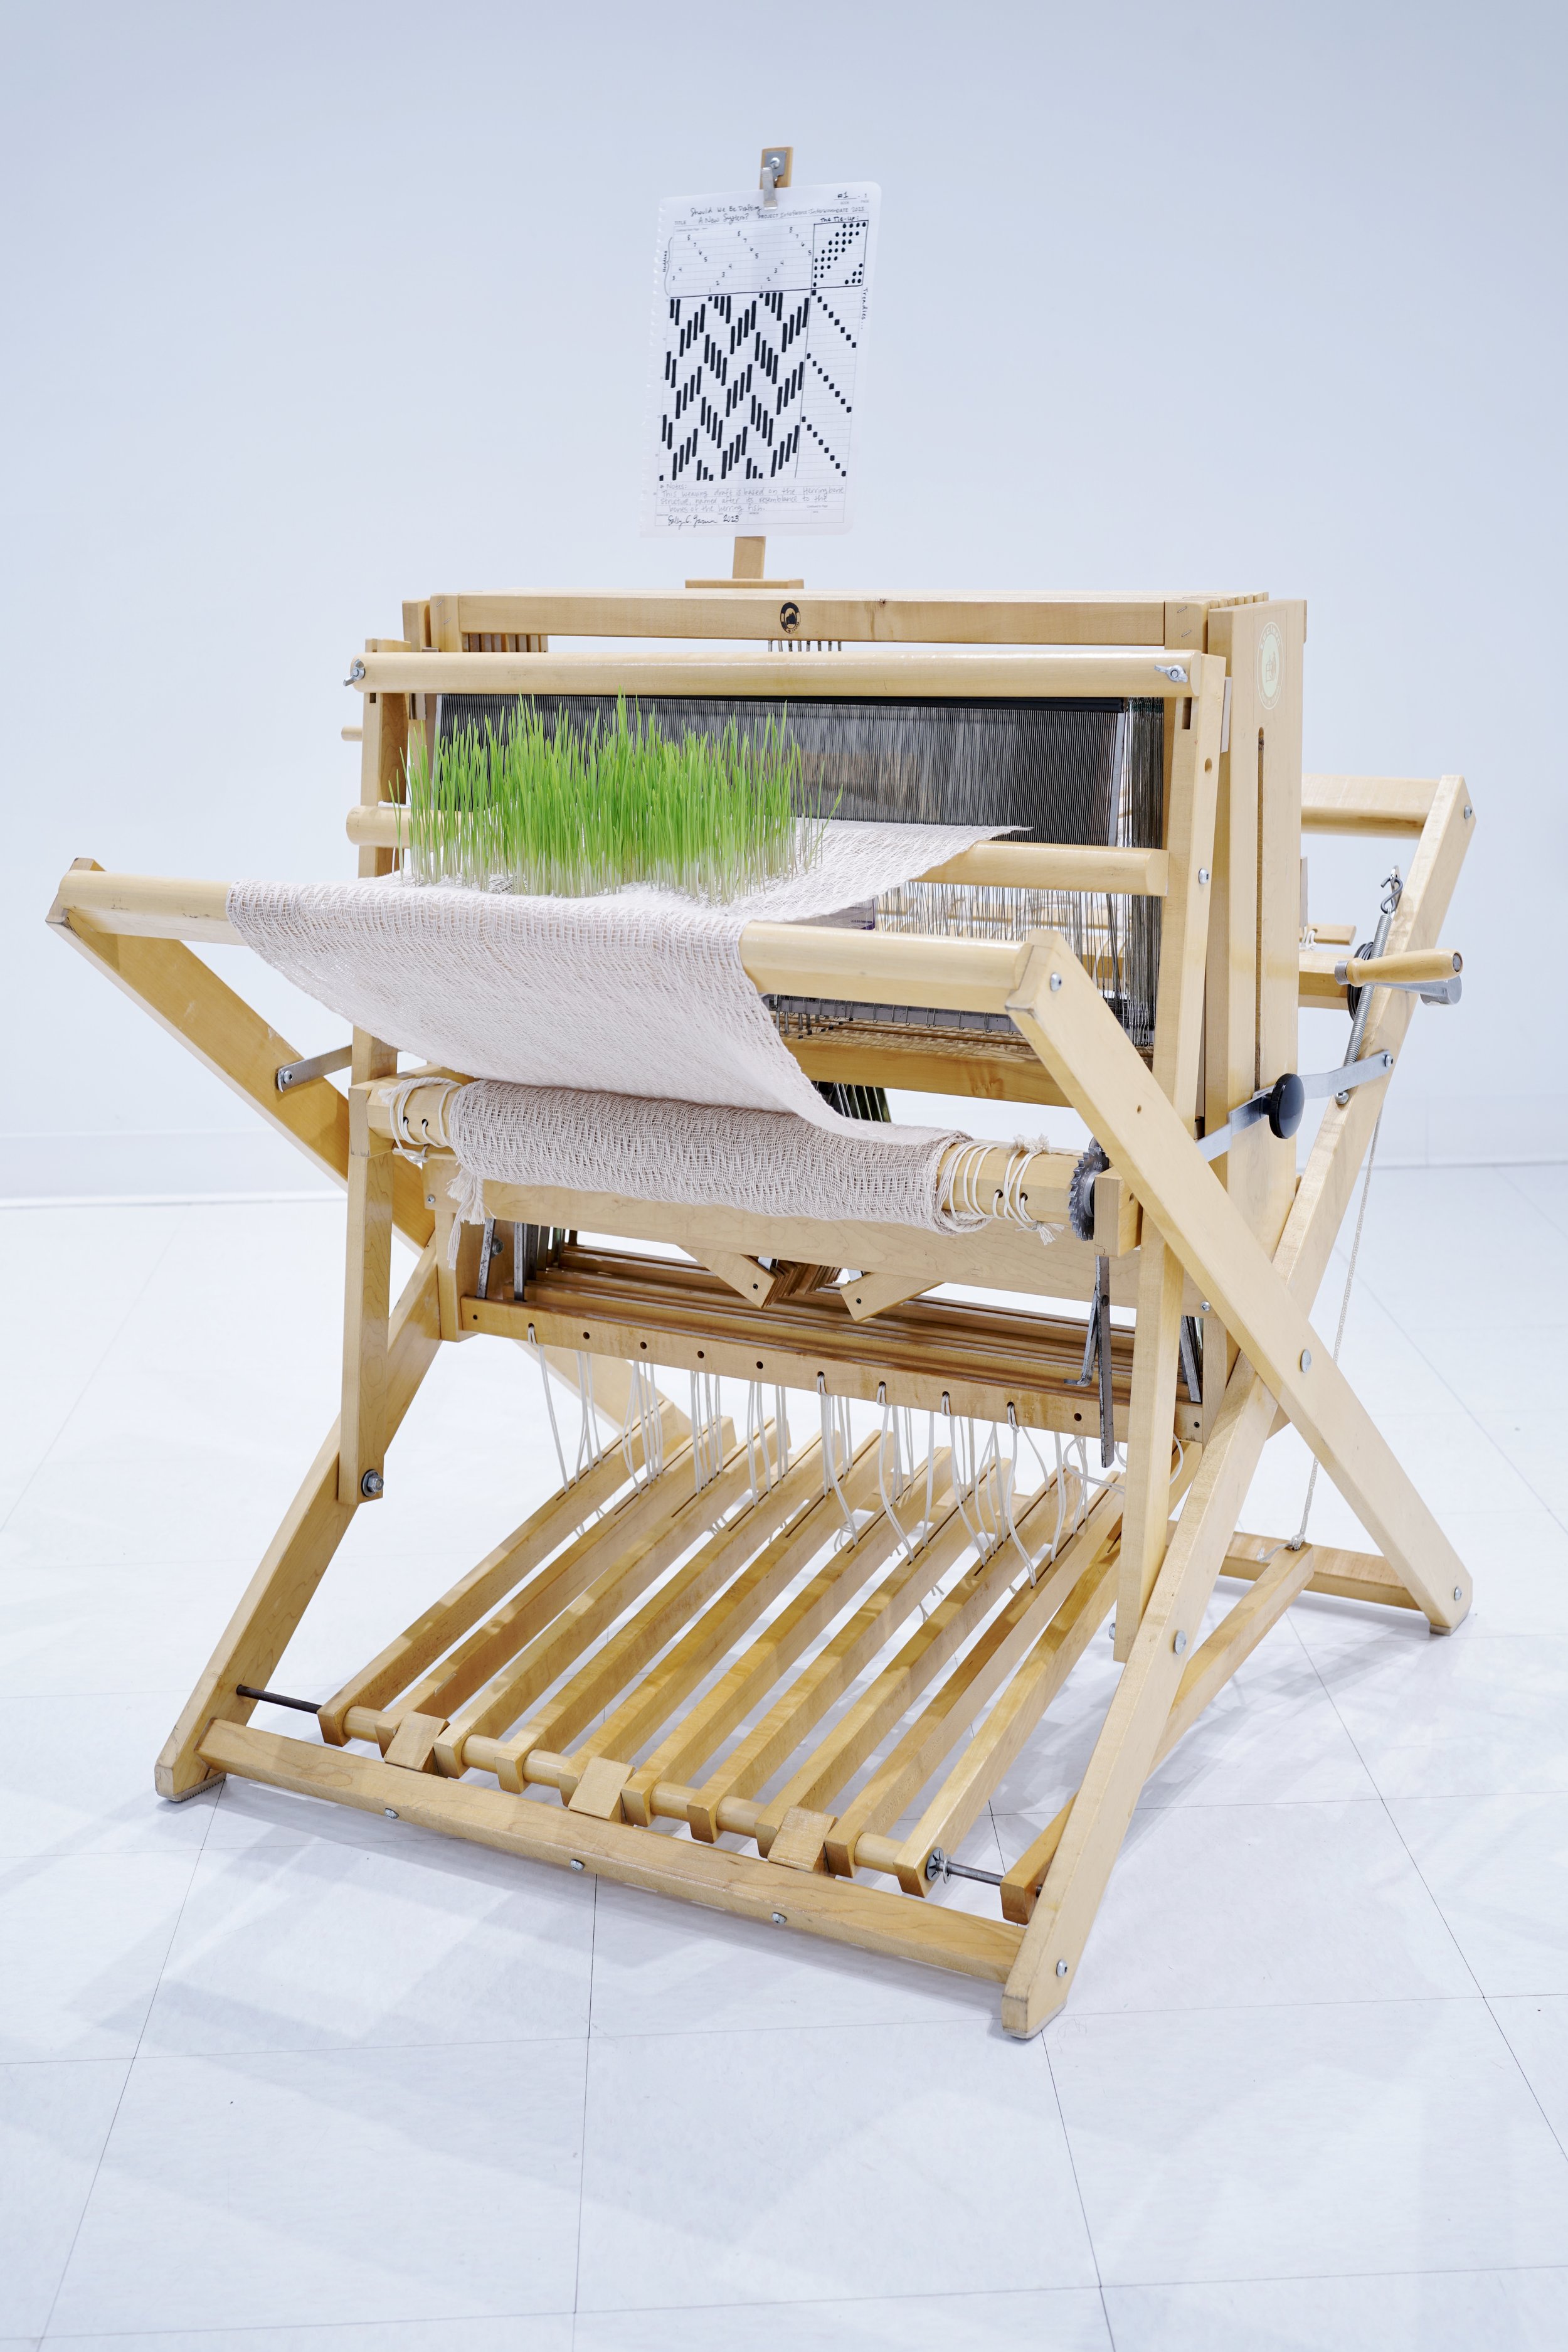   Should We Be Drafting a New System?   Weaving loom, cotton thread, triticale microgreens, acrylic bin, window screen, plastic tubing, plexiglass, water, ink on paper   Photographed on April 7, 2023 